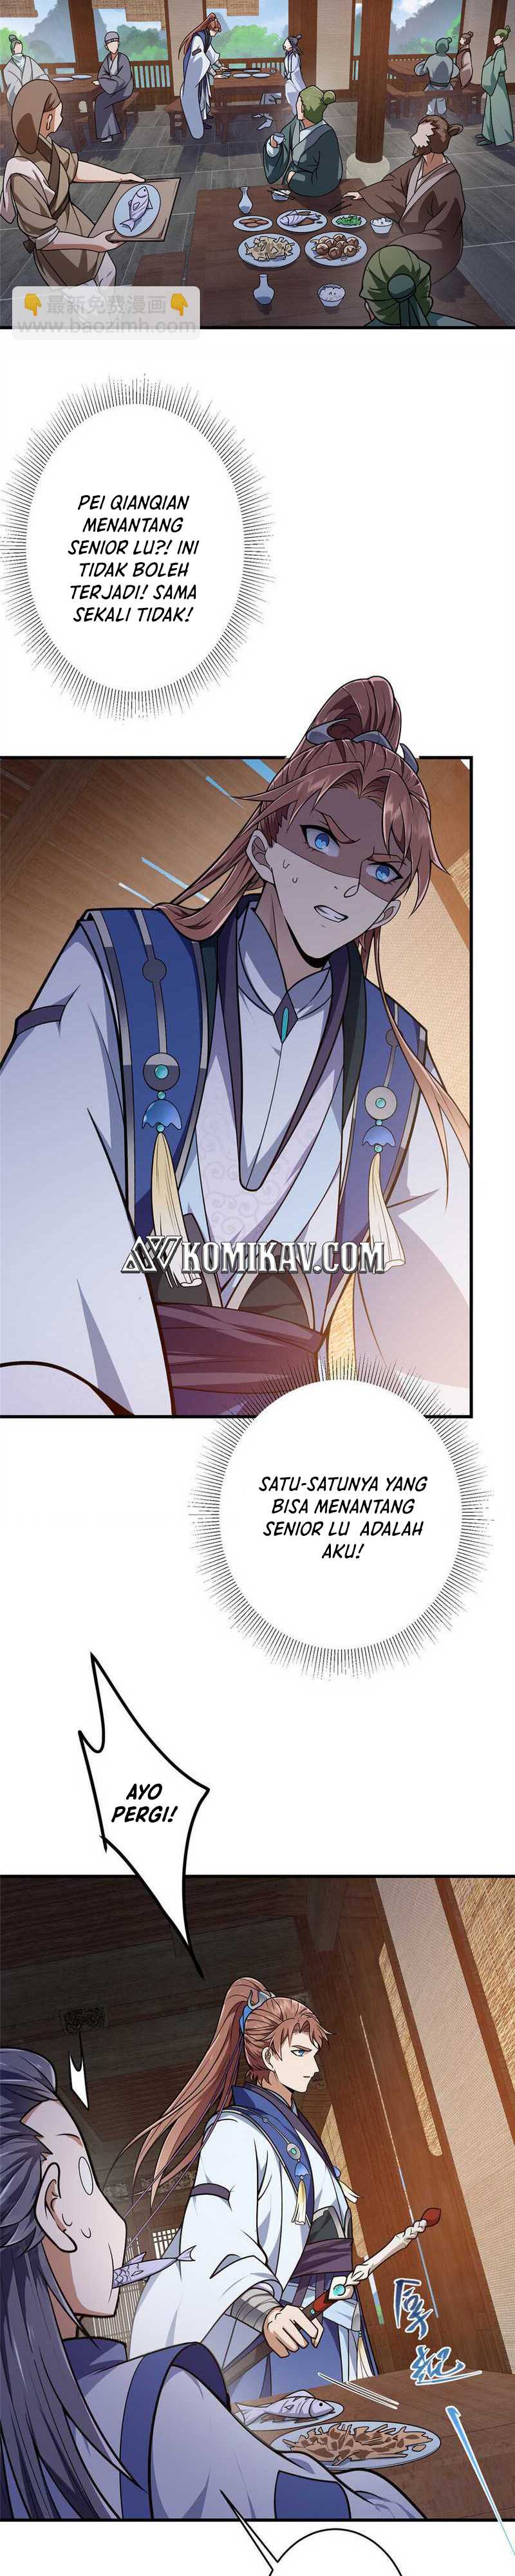 Keep A Low Profile, Sect Leader Chapter 180 Image 4